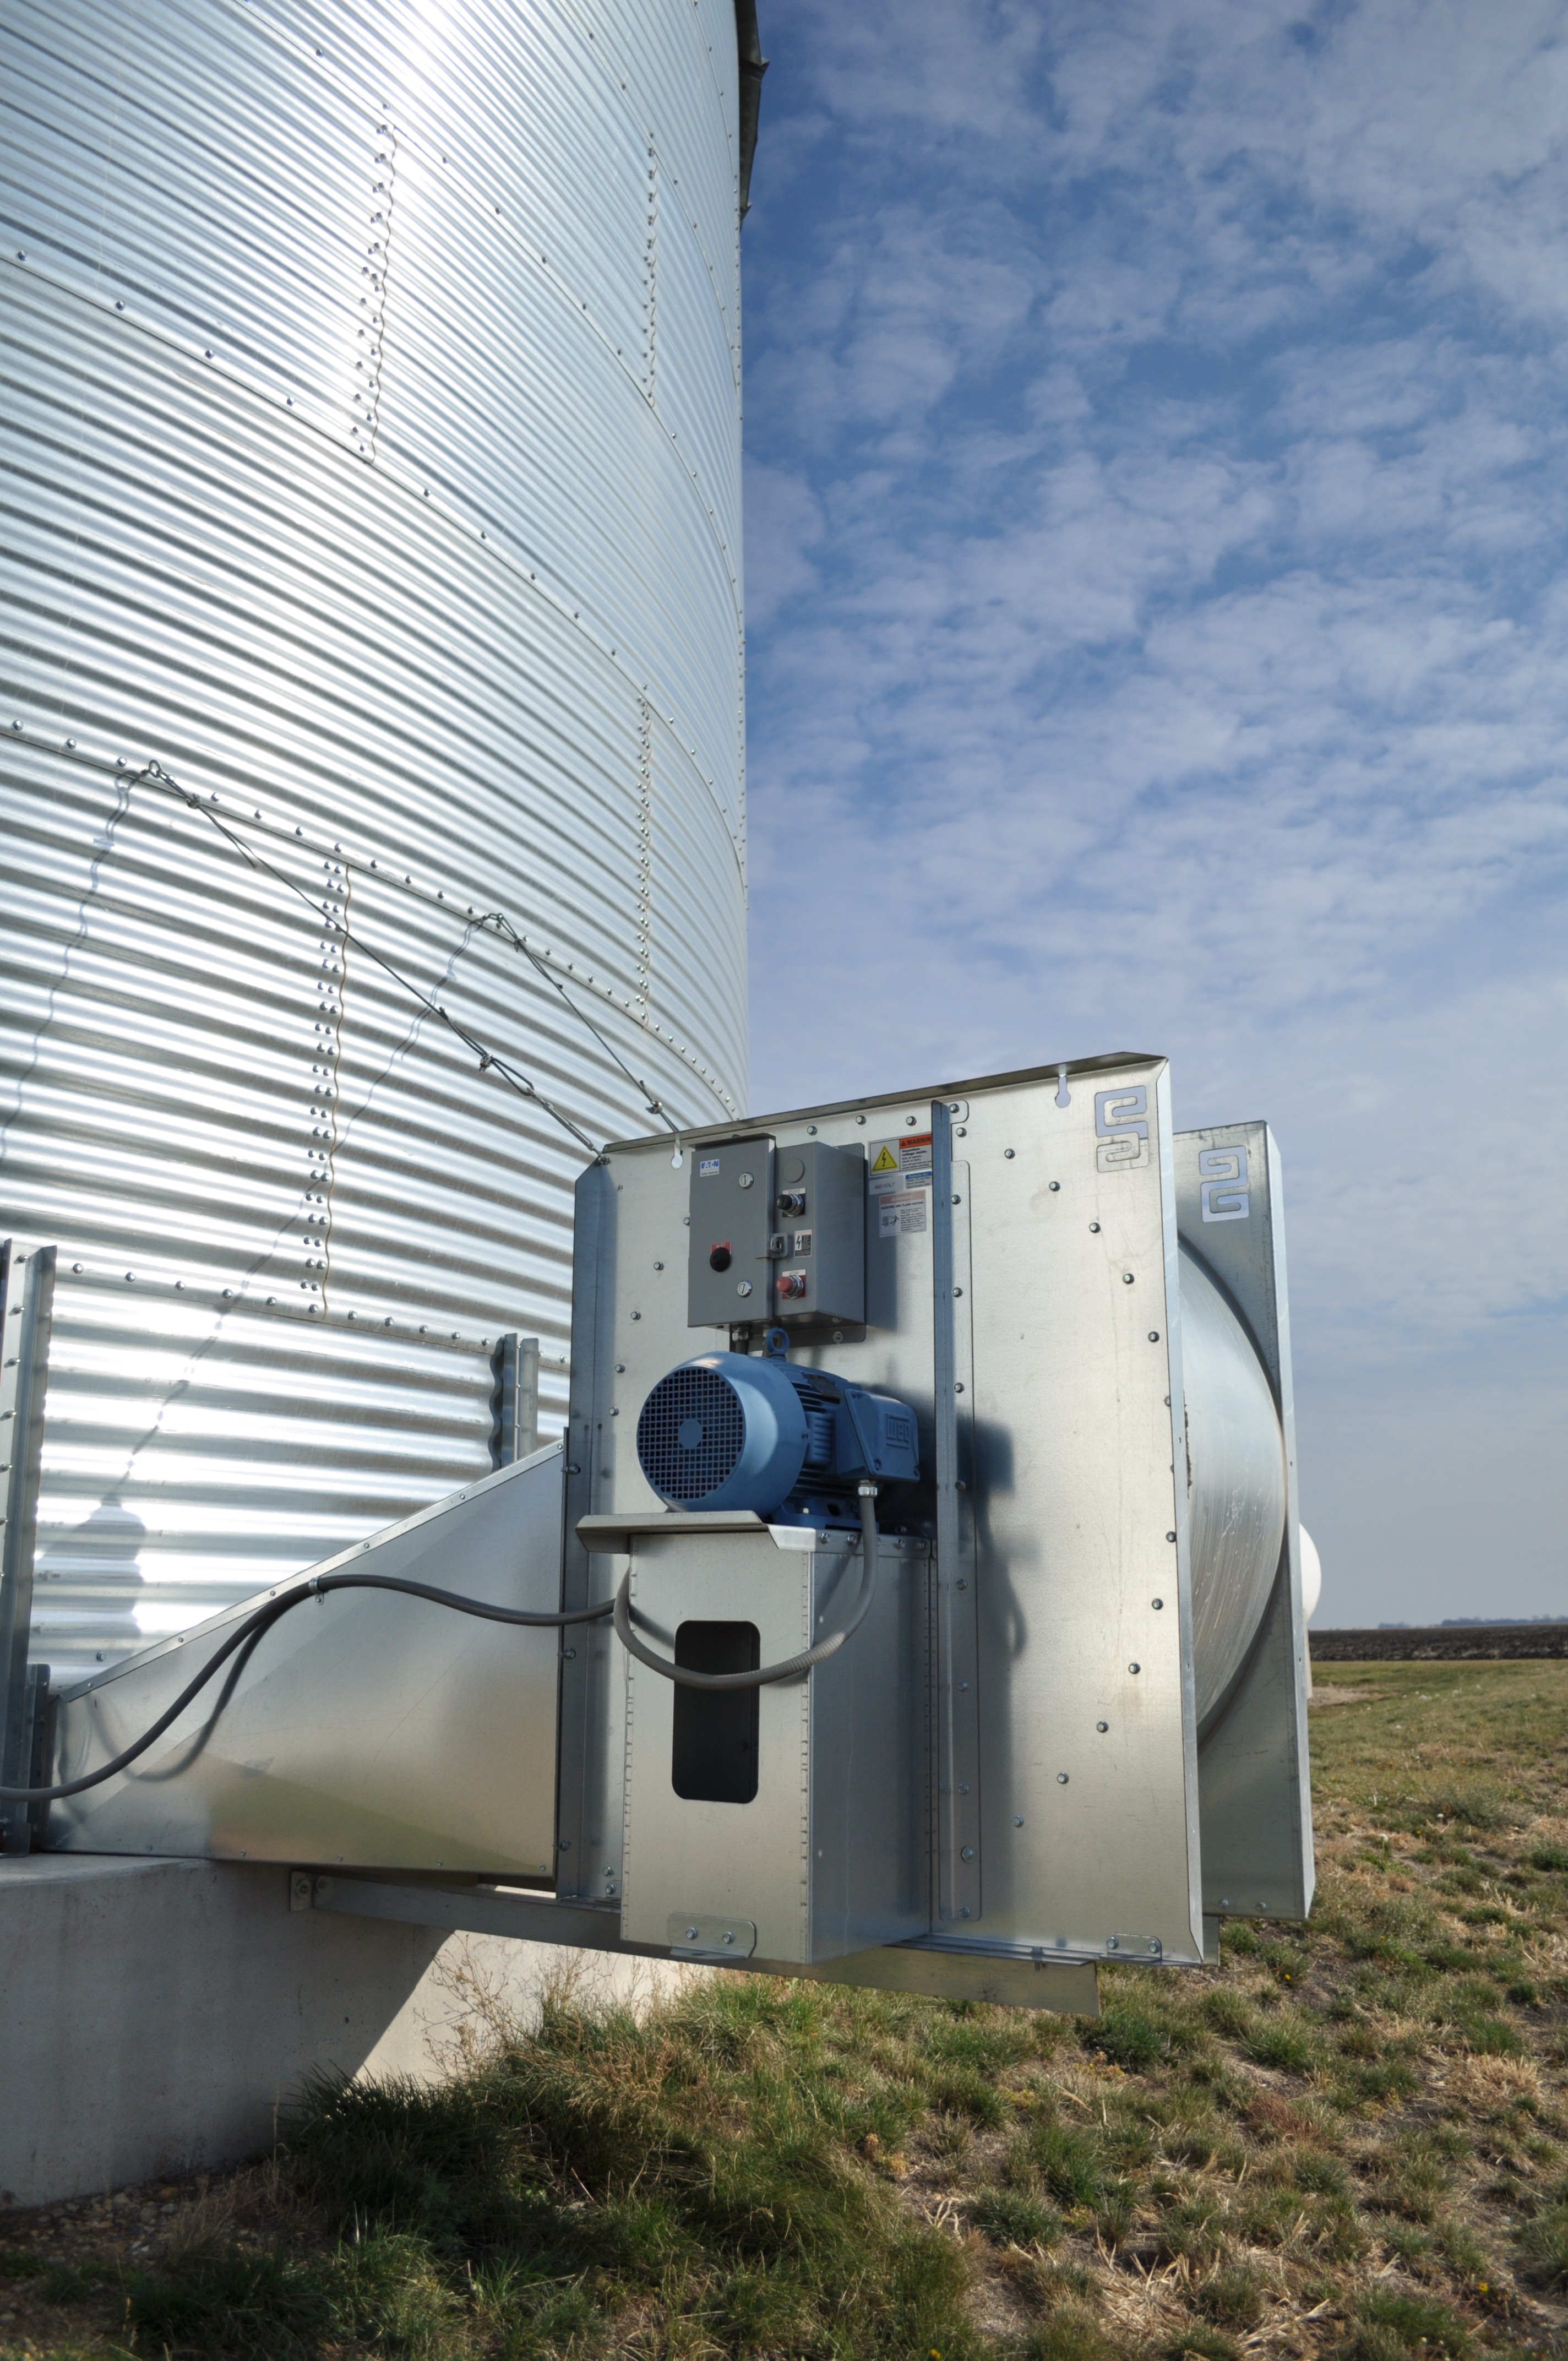 Even airflow through the grain bin is essential for proper cooling, storage and air drying. Centrifugal fans are advantageous when relatively high air volumes need to be pushed through deep grain levels (12-20 feet) and are less expensive to operate.